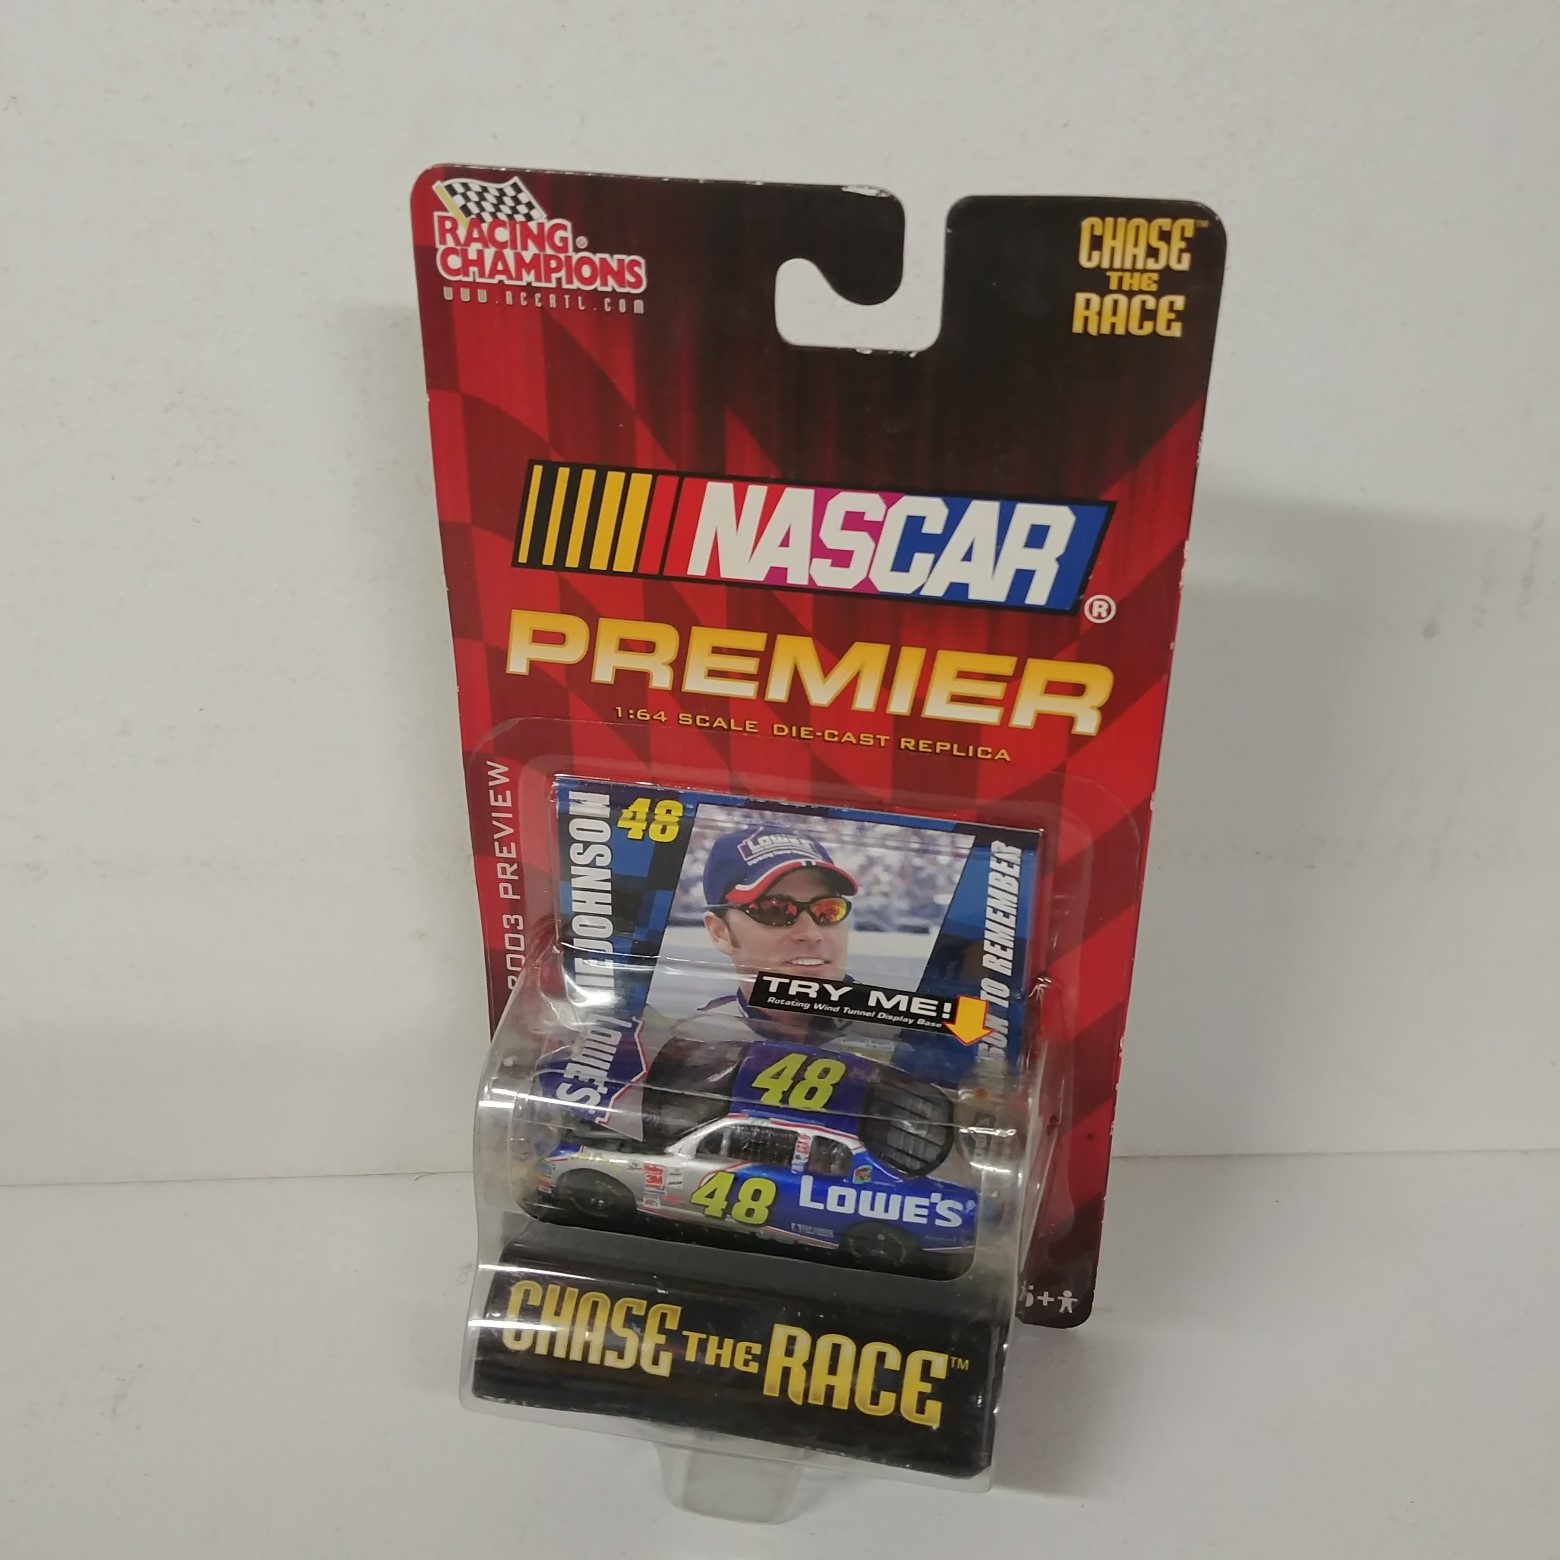 2003 Jimmie Johnson 1/64th Lowe's "Wind Tunnel" Preview car